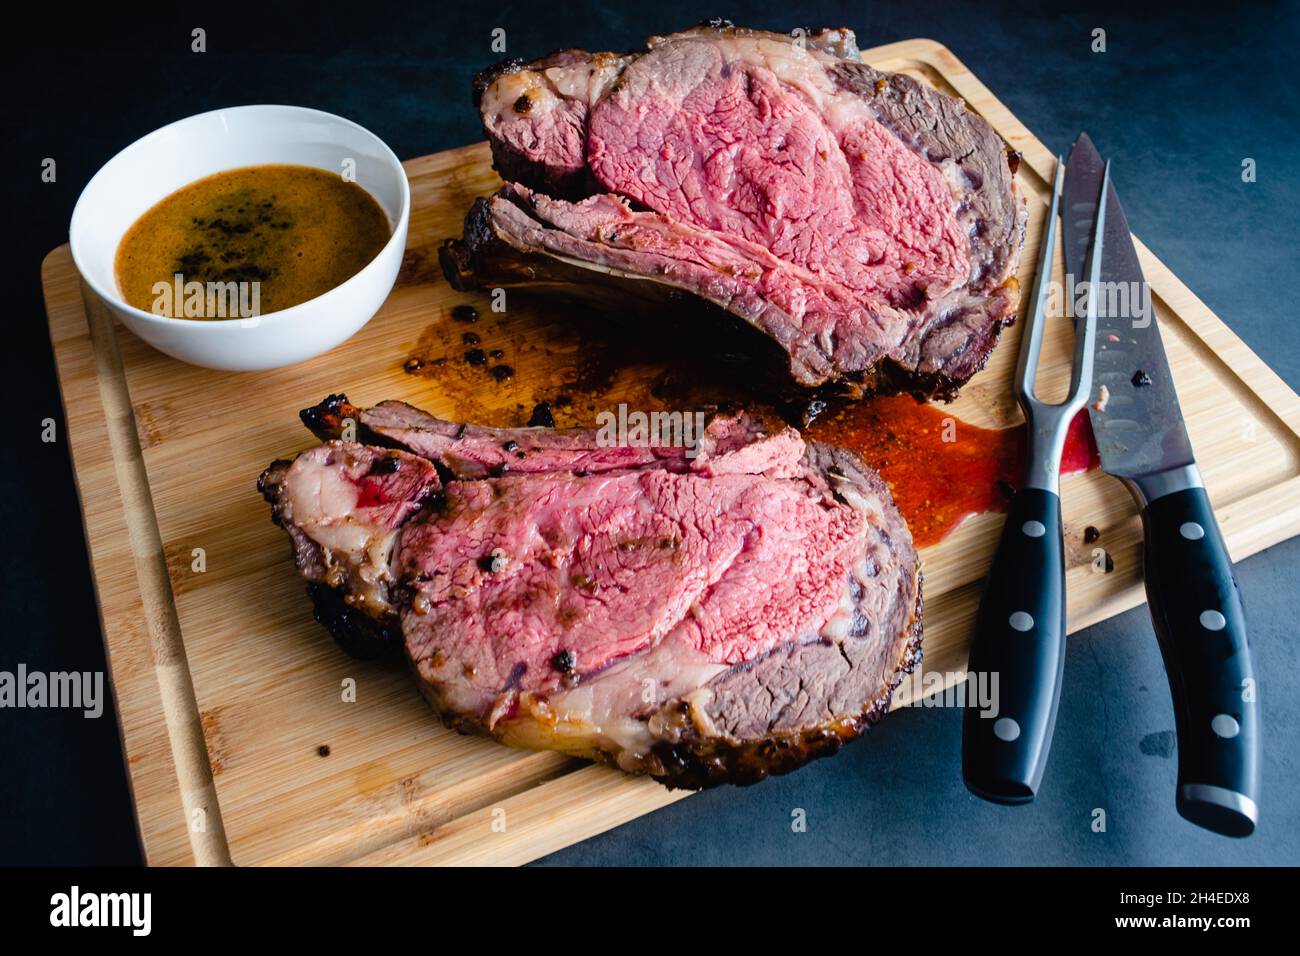 https://c8.alamy.com/comp/2H4EDX8/slices-of-medium-rare-bone-in-prime-rib-with-au-jus-carved-standing-prime-rib-roast-on-a-bamboo-carving-board-2H4EDX8.jpg